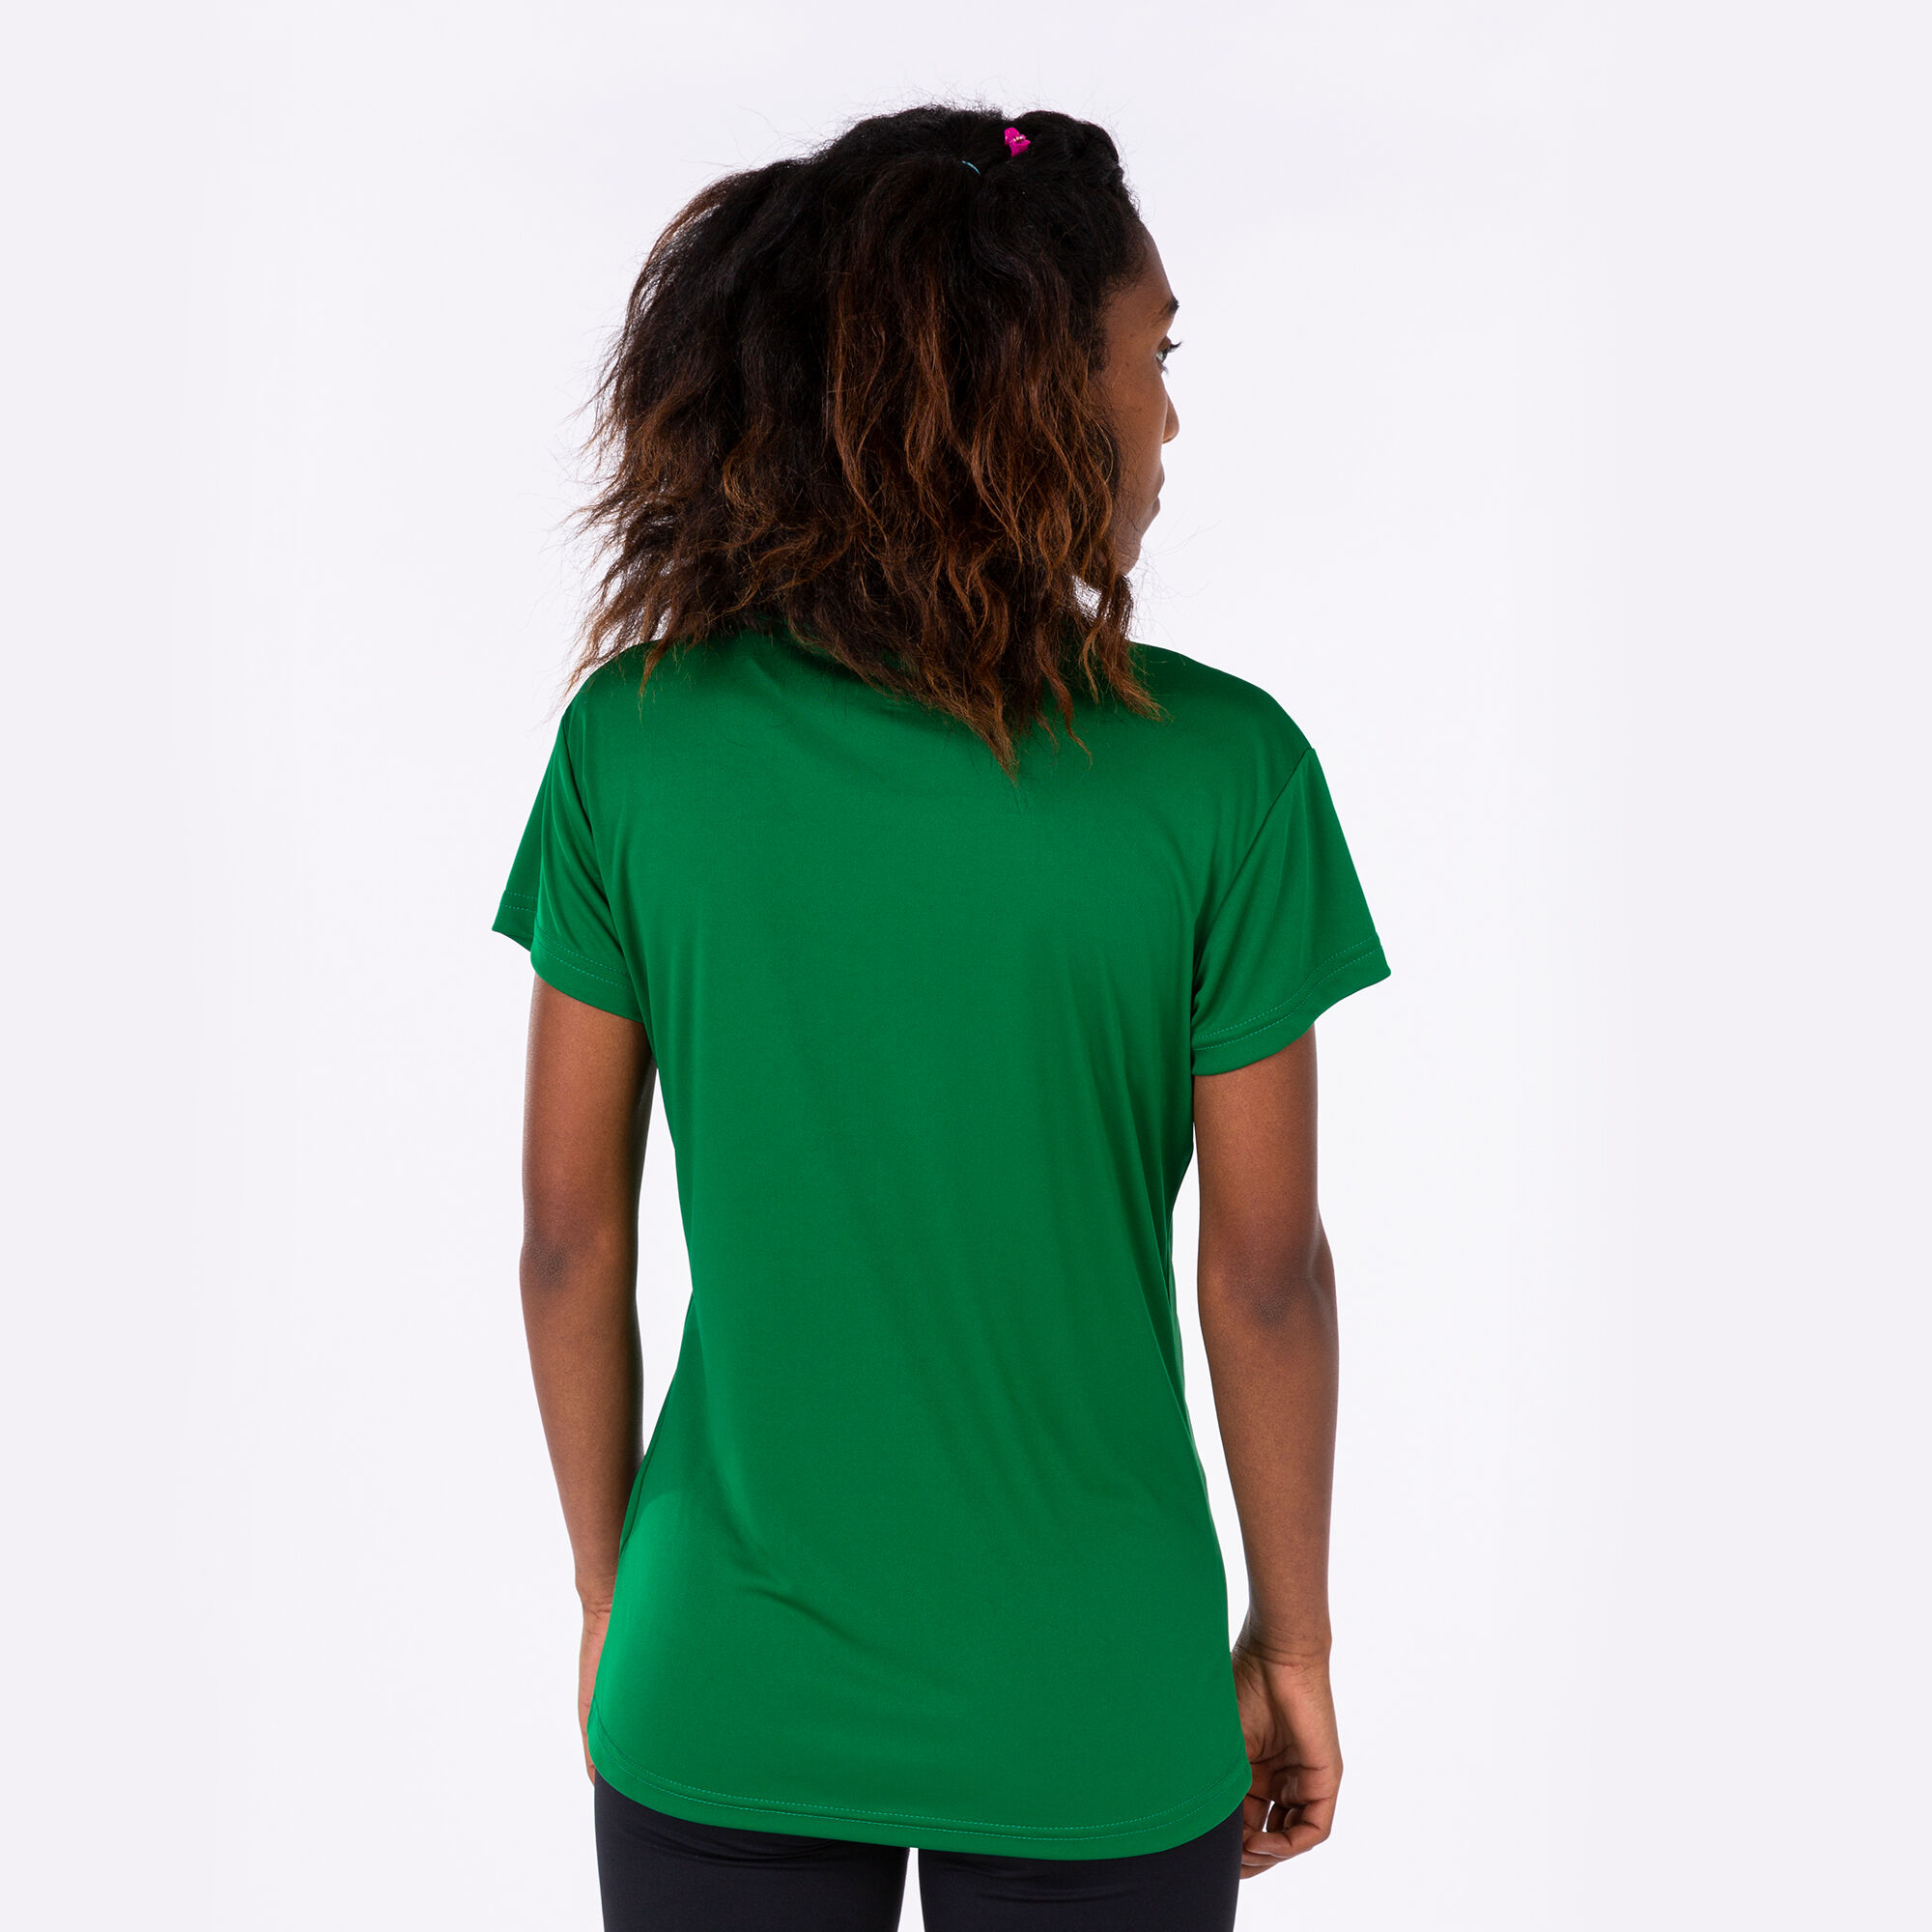 Maillot manches courtes femme Record II vert